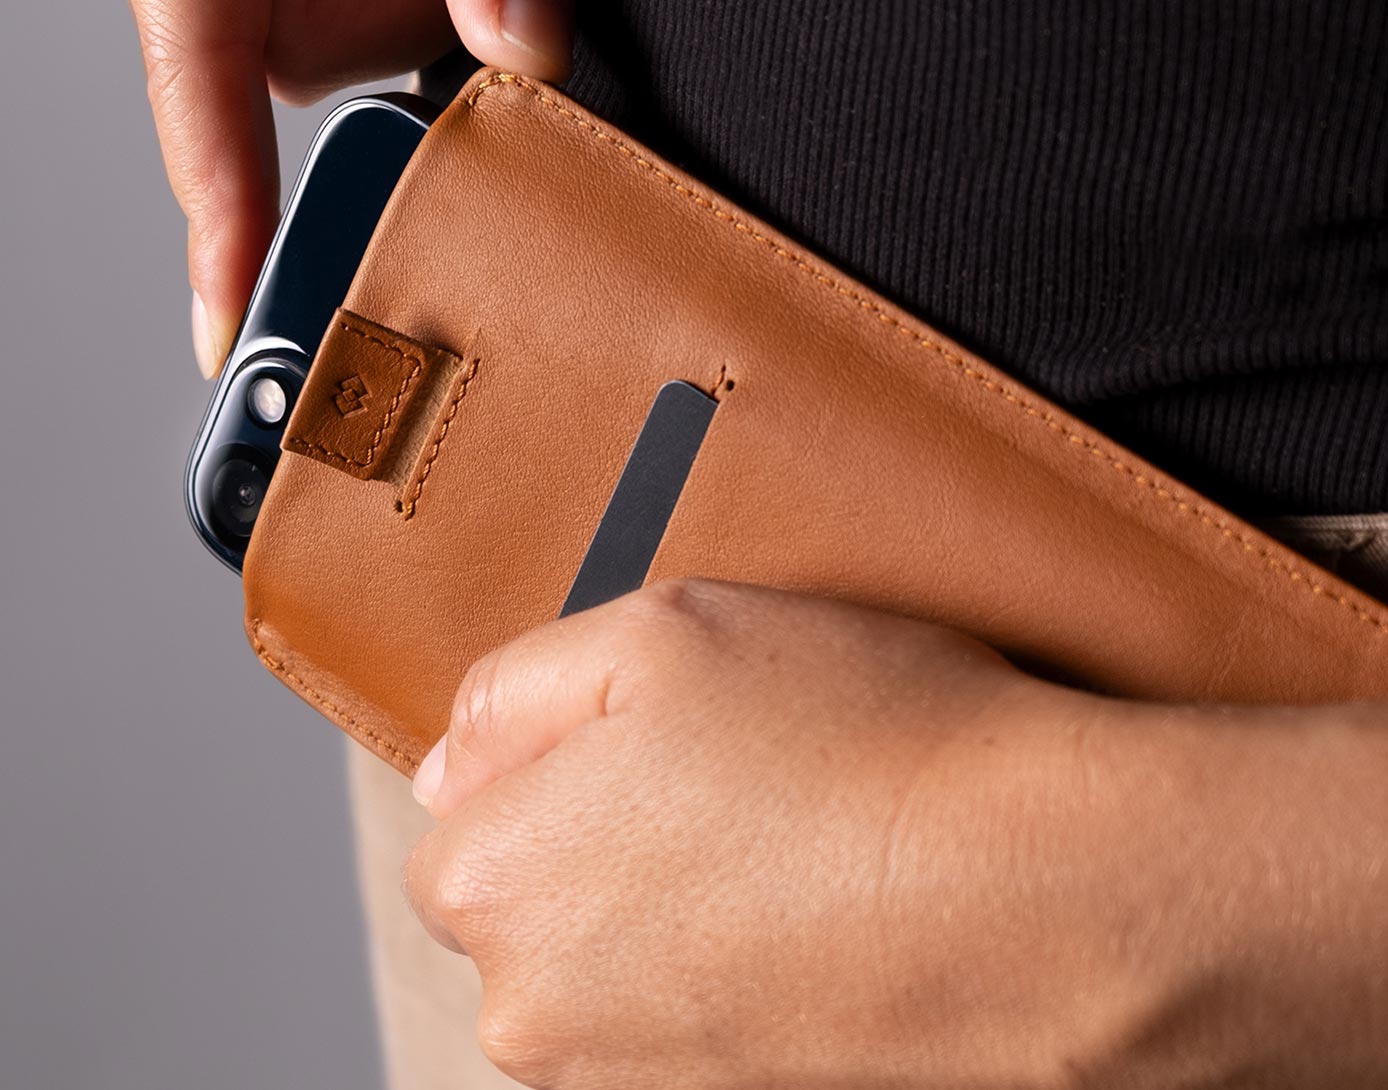 The London Tan | Genuine Smooth Leather iPhone Case Crossbody iPhone 10/x/xs